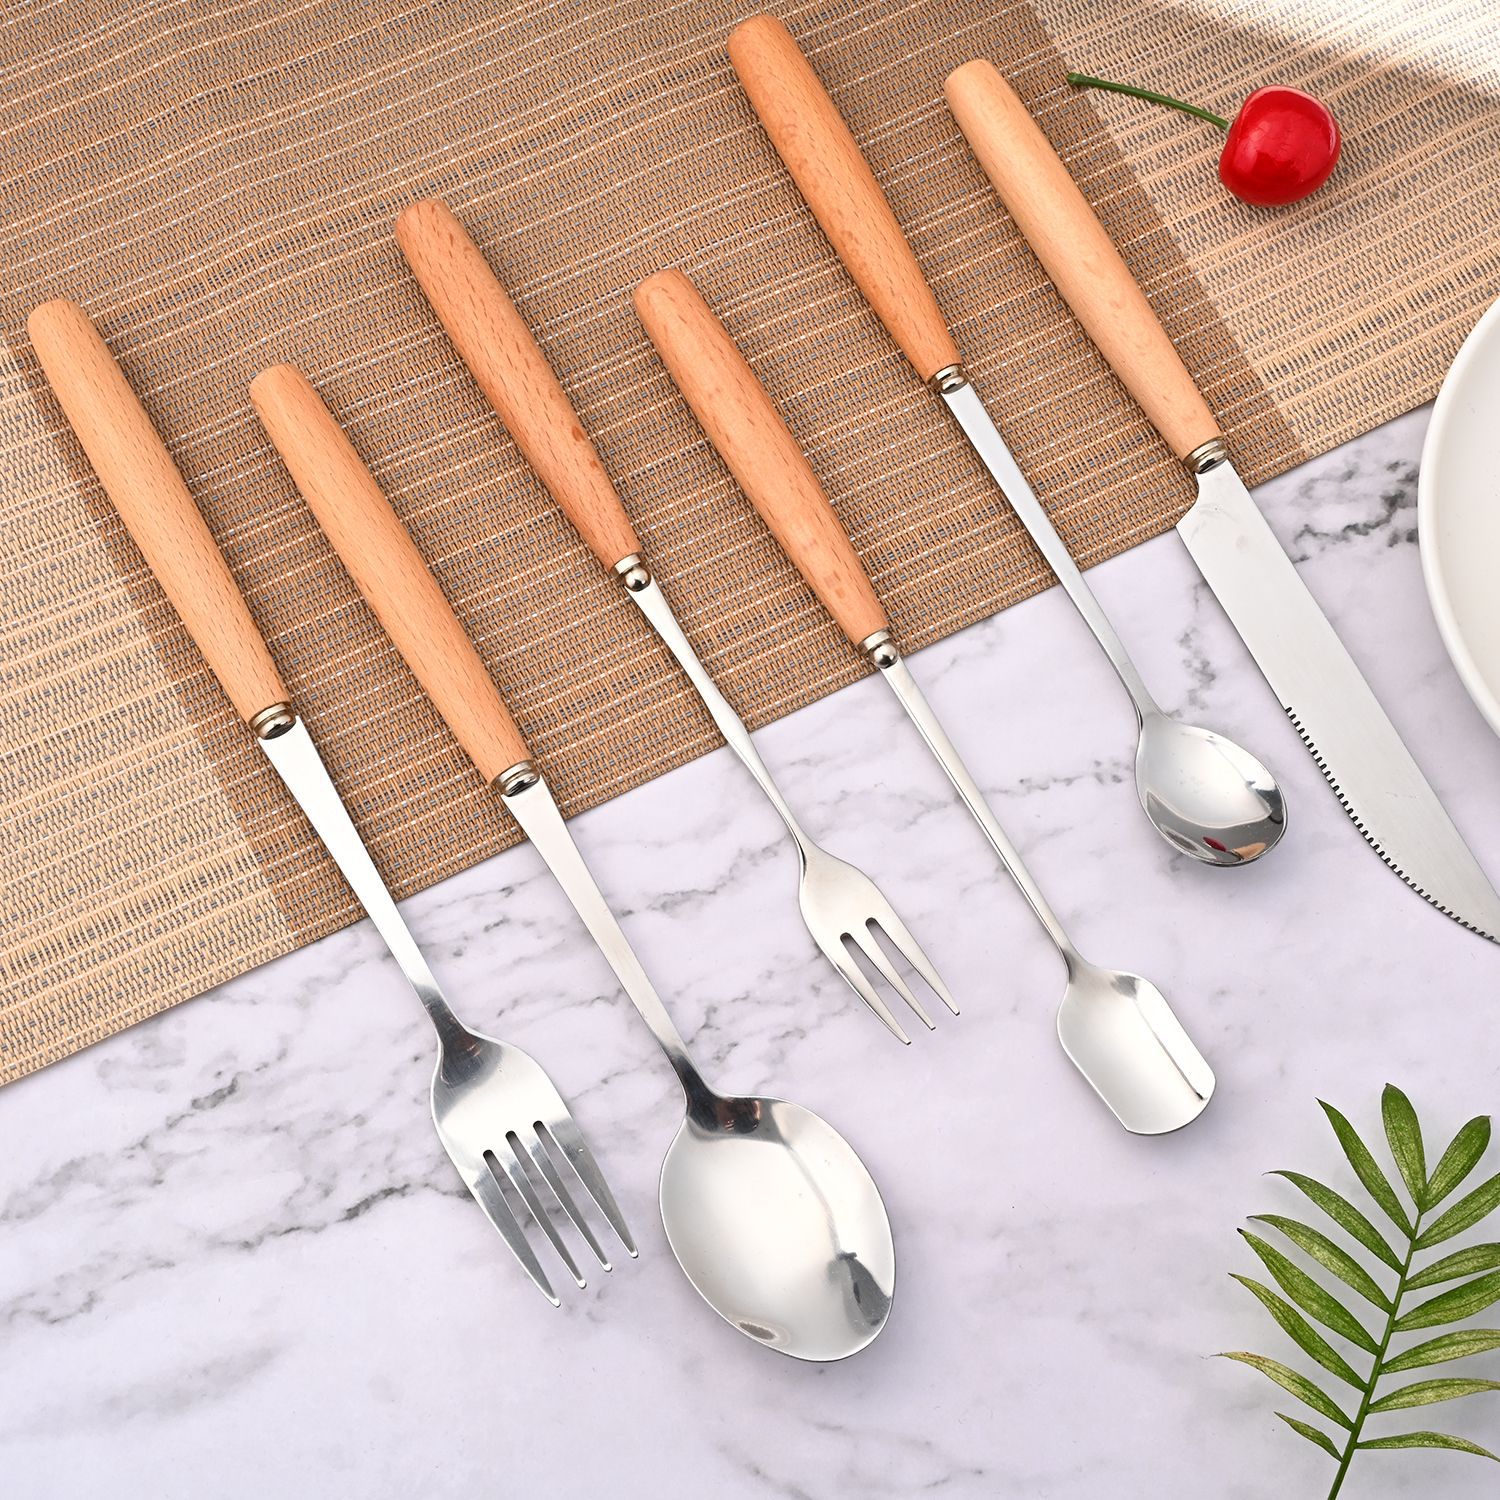 Japanese Style Stainless Steel Tableware with Wooden Handle Beech Handle Knife Fork Spoon Gift Tableware Spoon Fruit Fork Table Knife